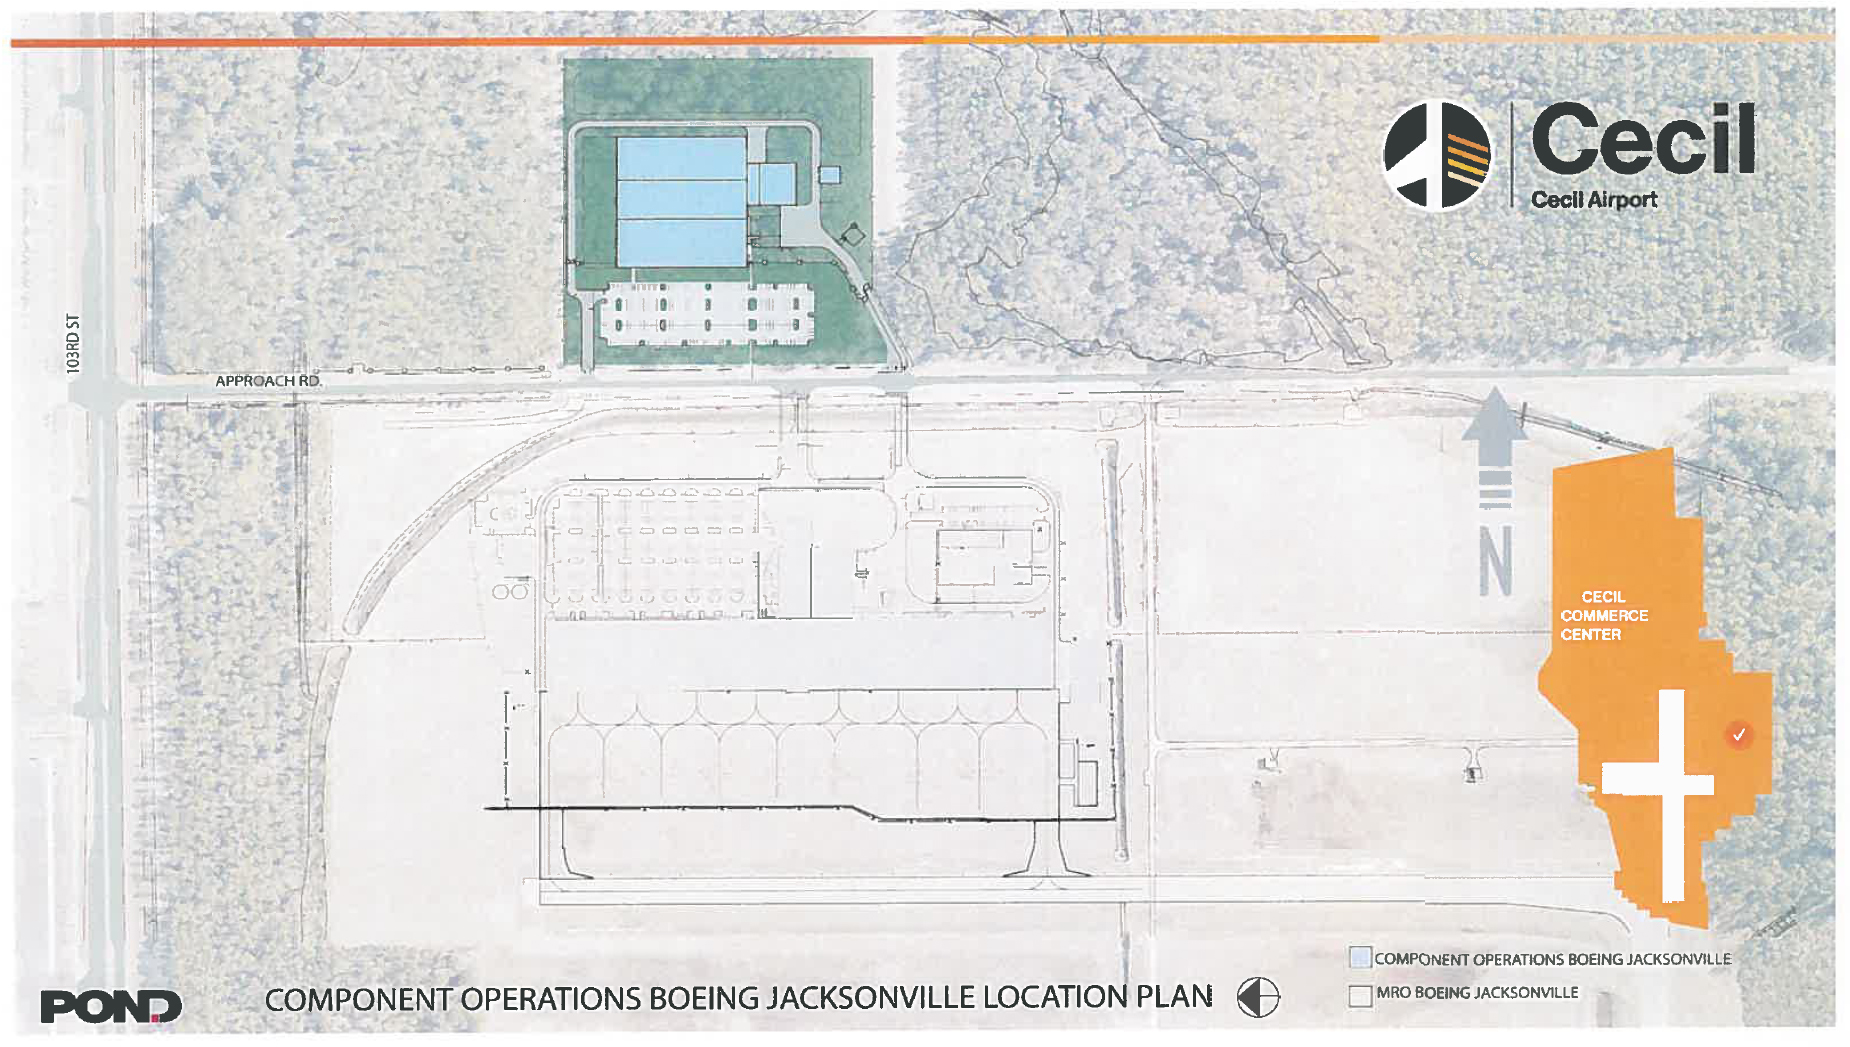 The Scannell site is north of the 400,600-square-foot project the Jacksonville Aviation Authority is building for Boeing at Cecil Airport